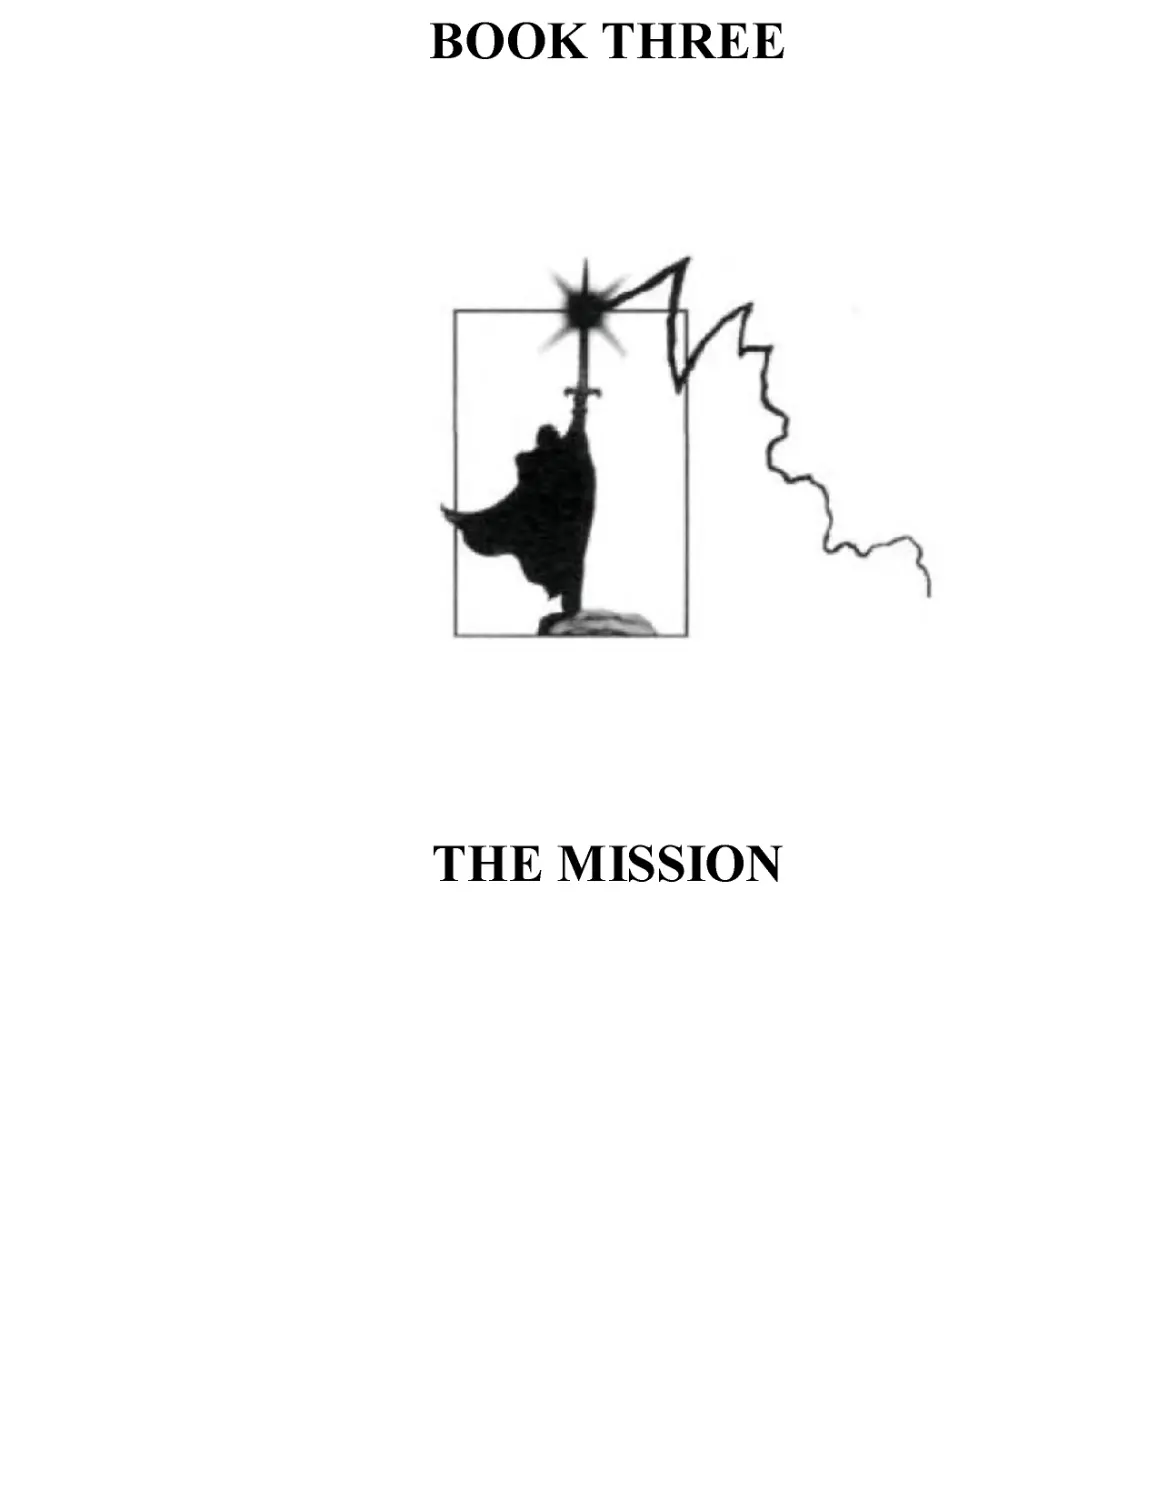 BOOK THREE: THE MISSION